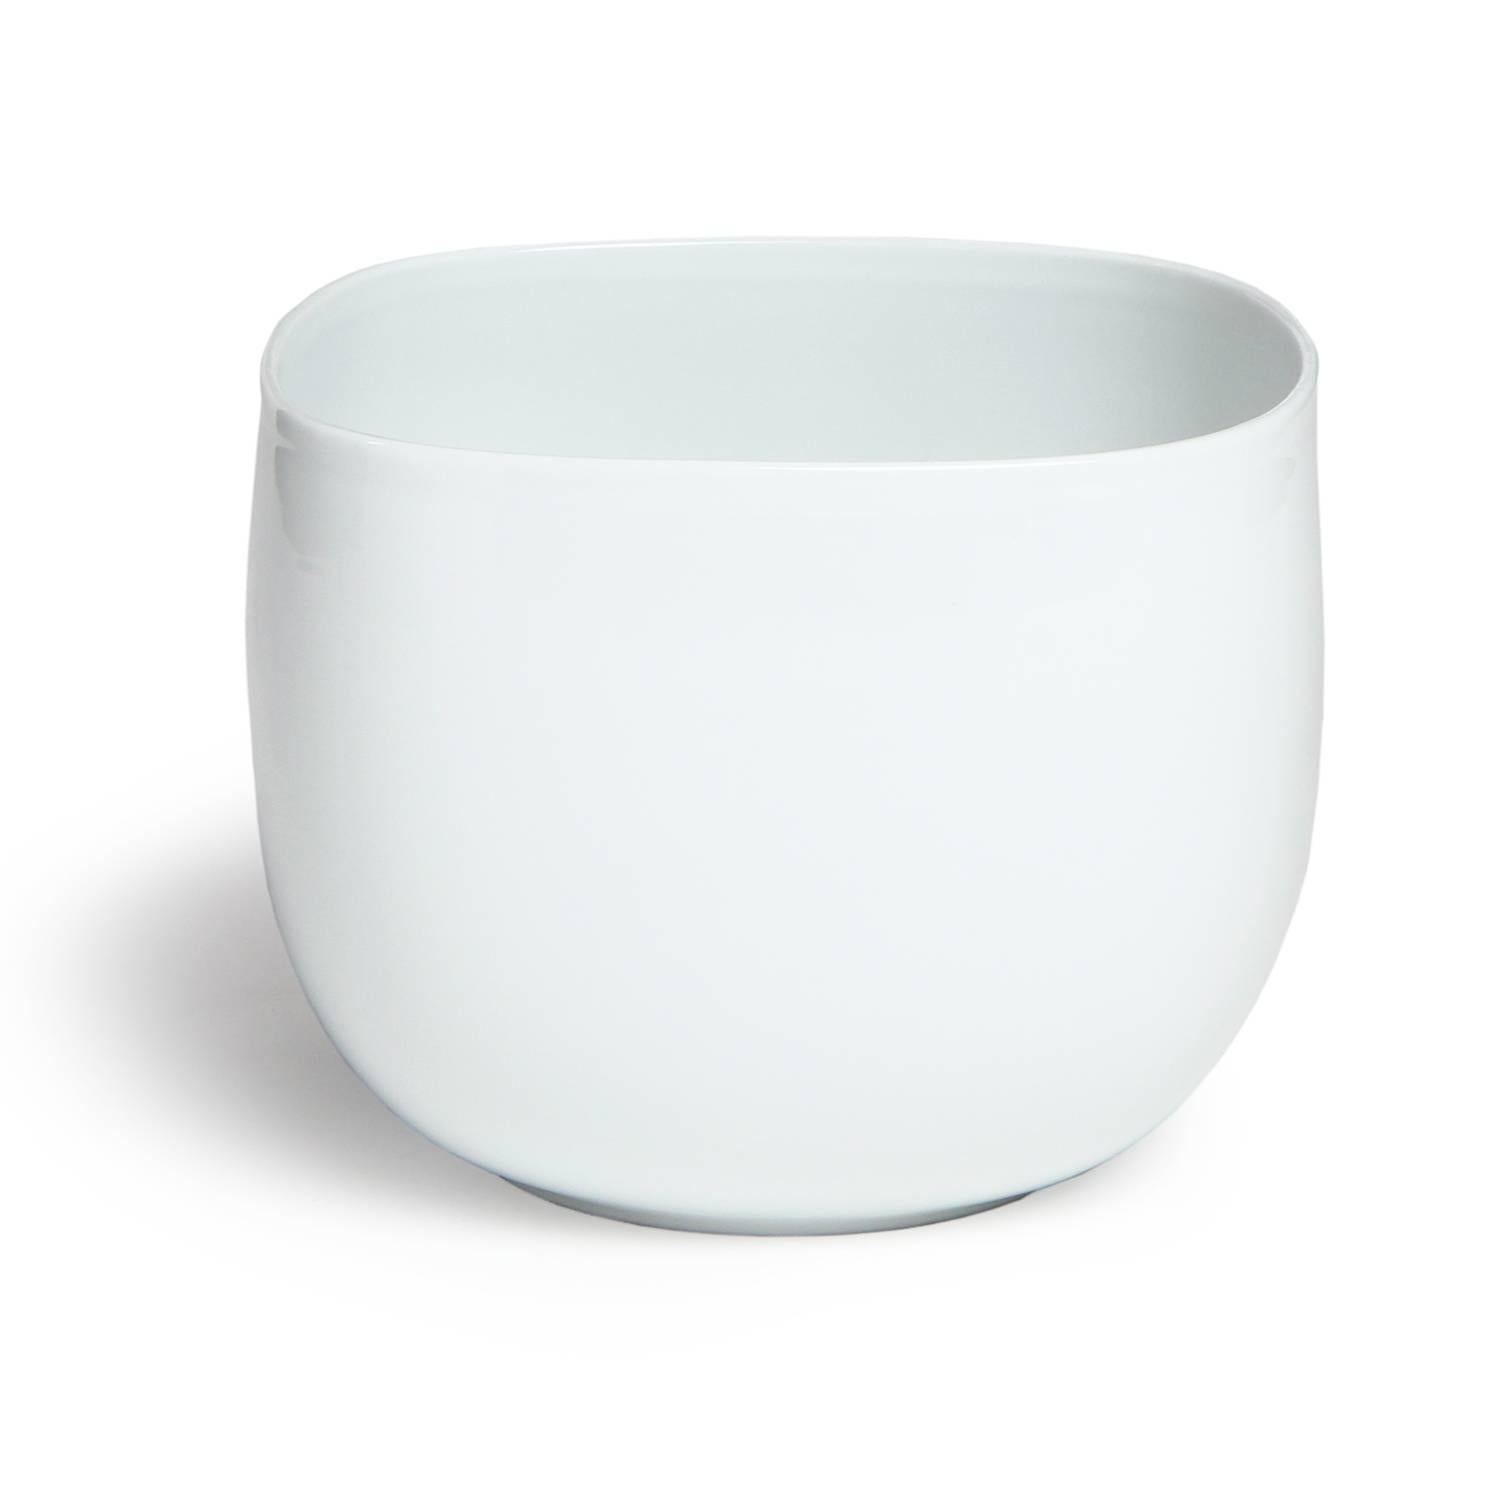 A beautiful and simple tall walled bowl made of pure white porcelain.